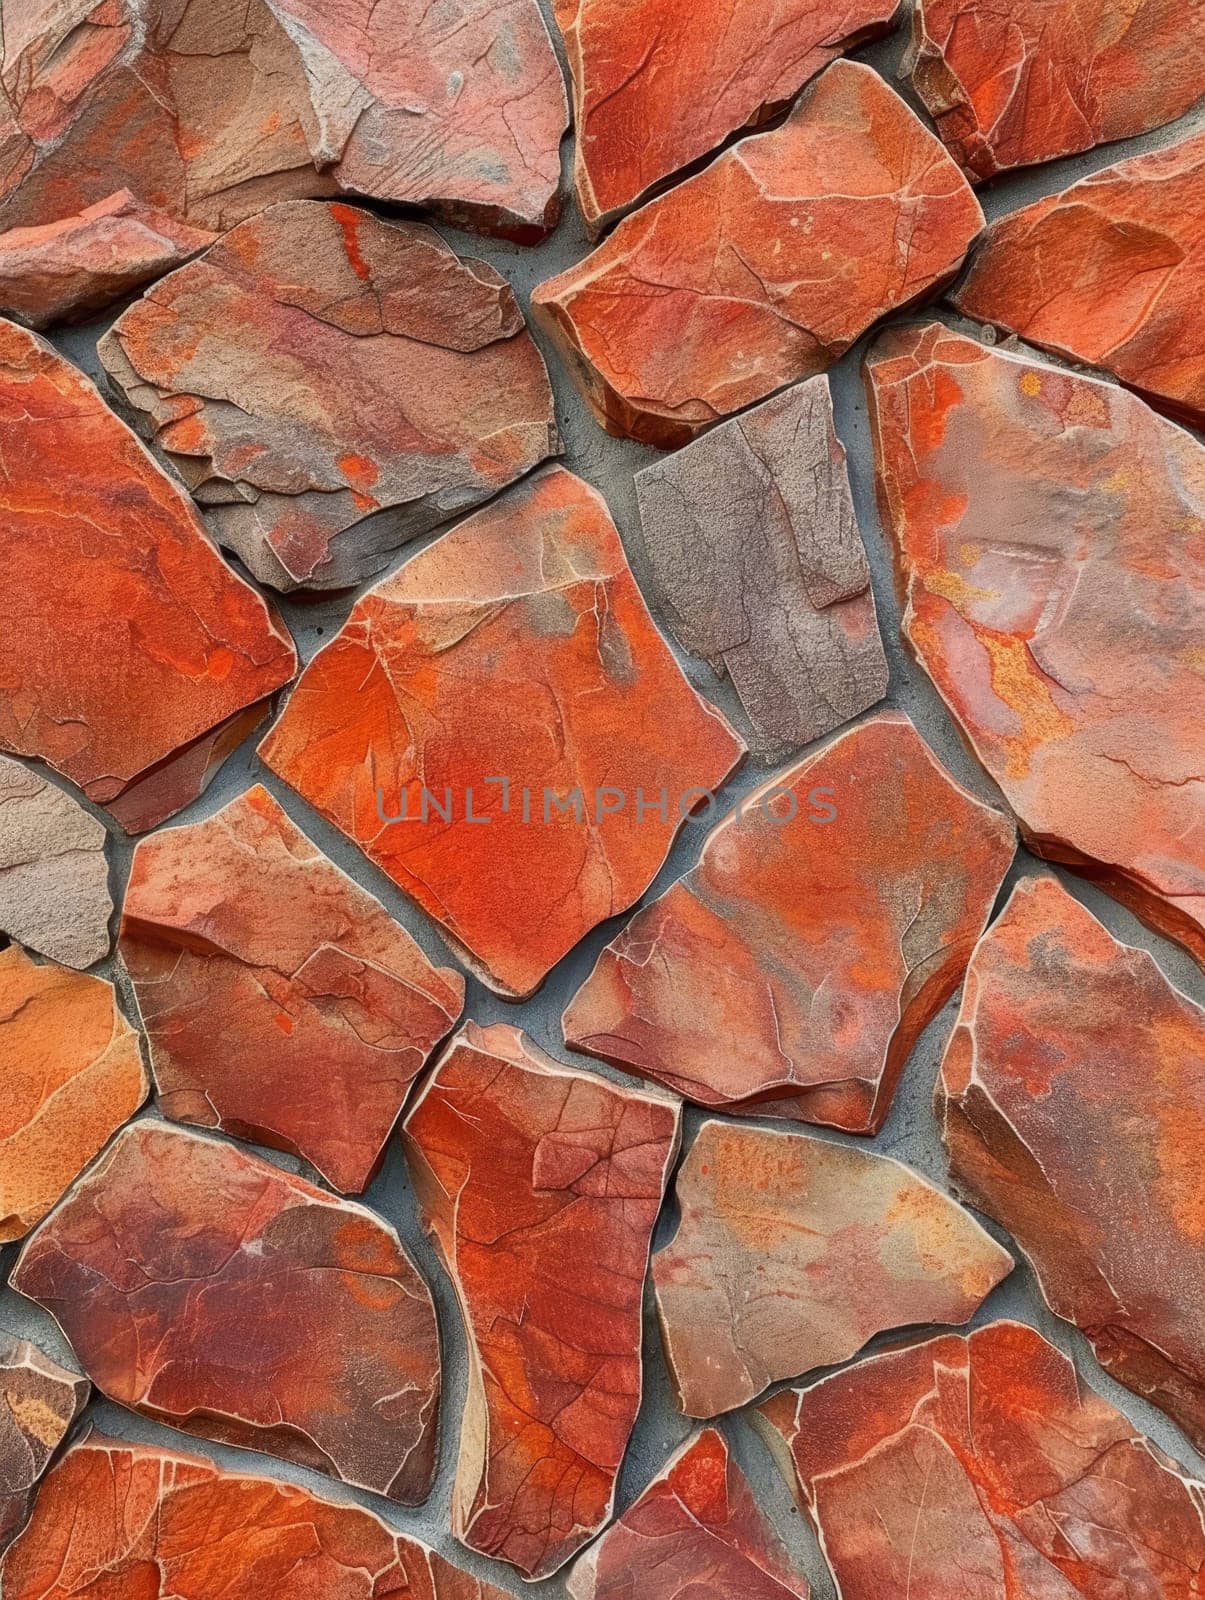 Vivid rustic red stone cladding with varied hues and textures for a rich visual appearance. by sfinks